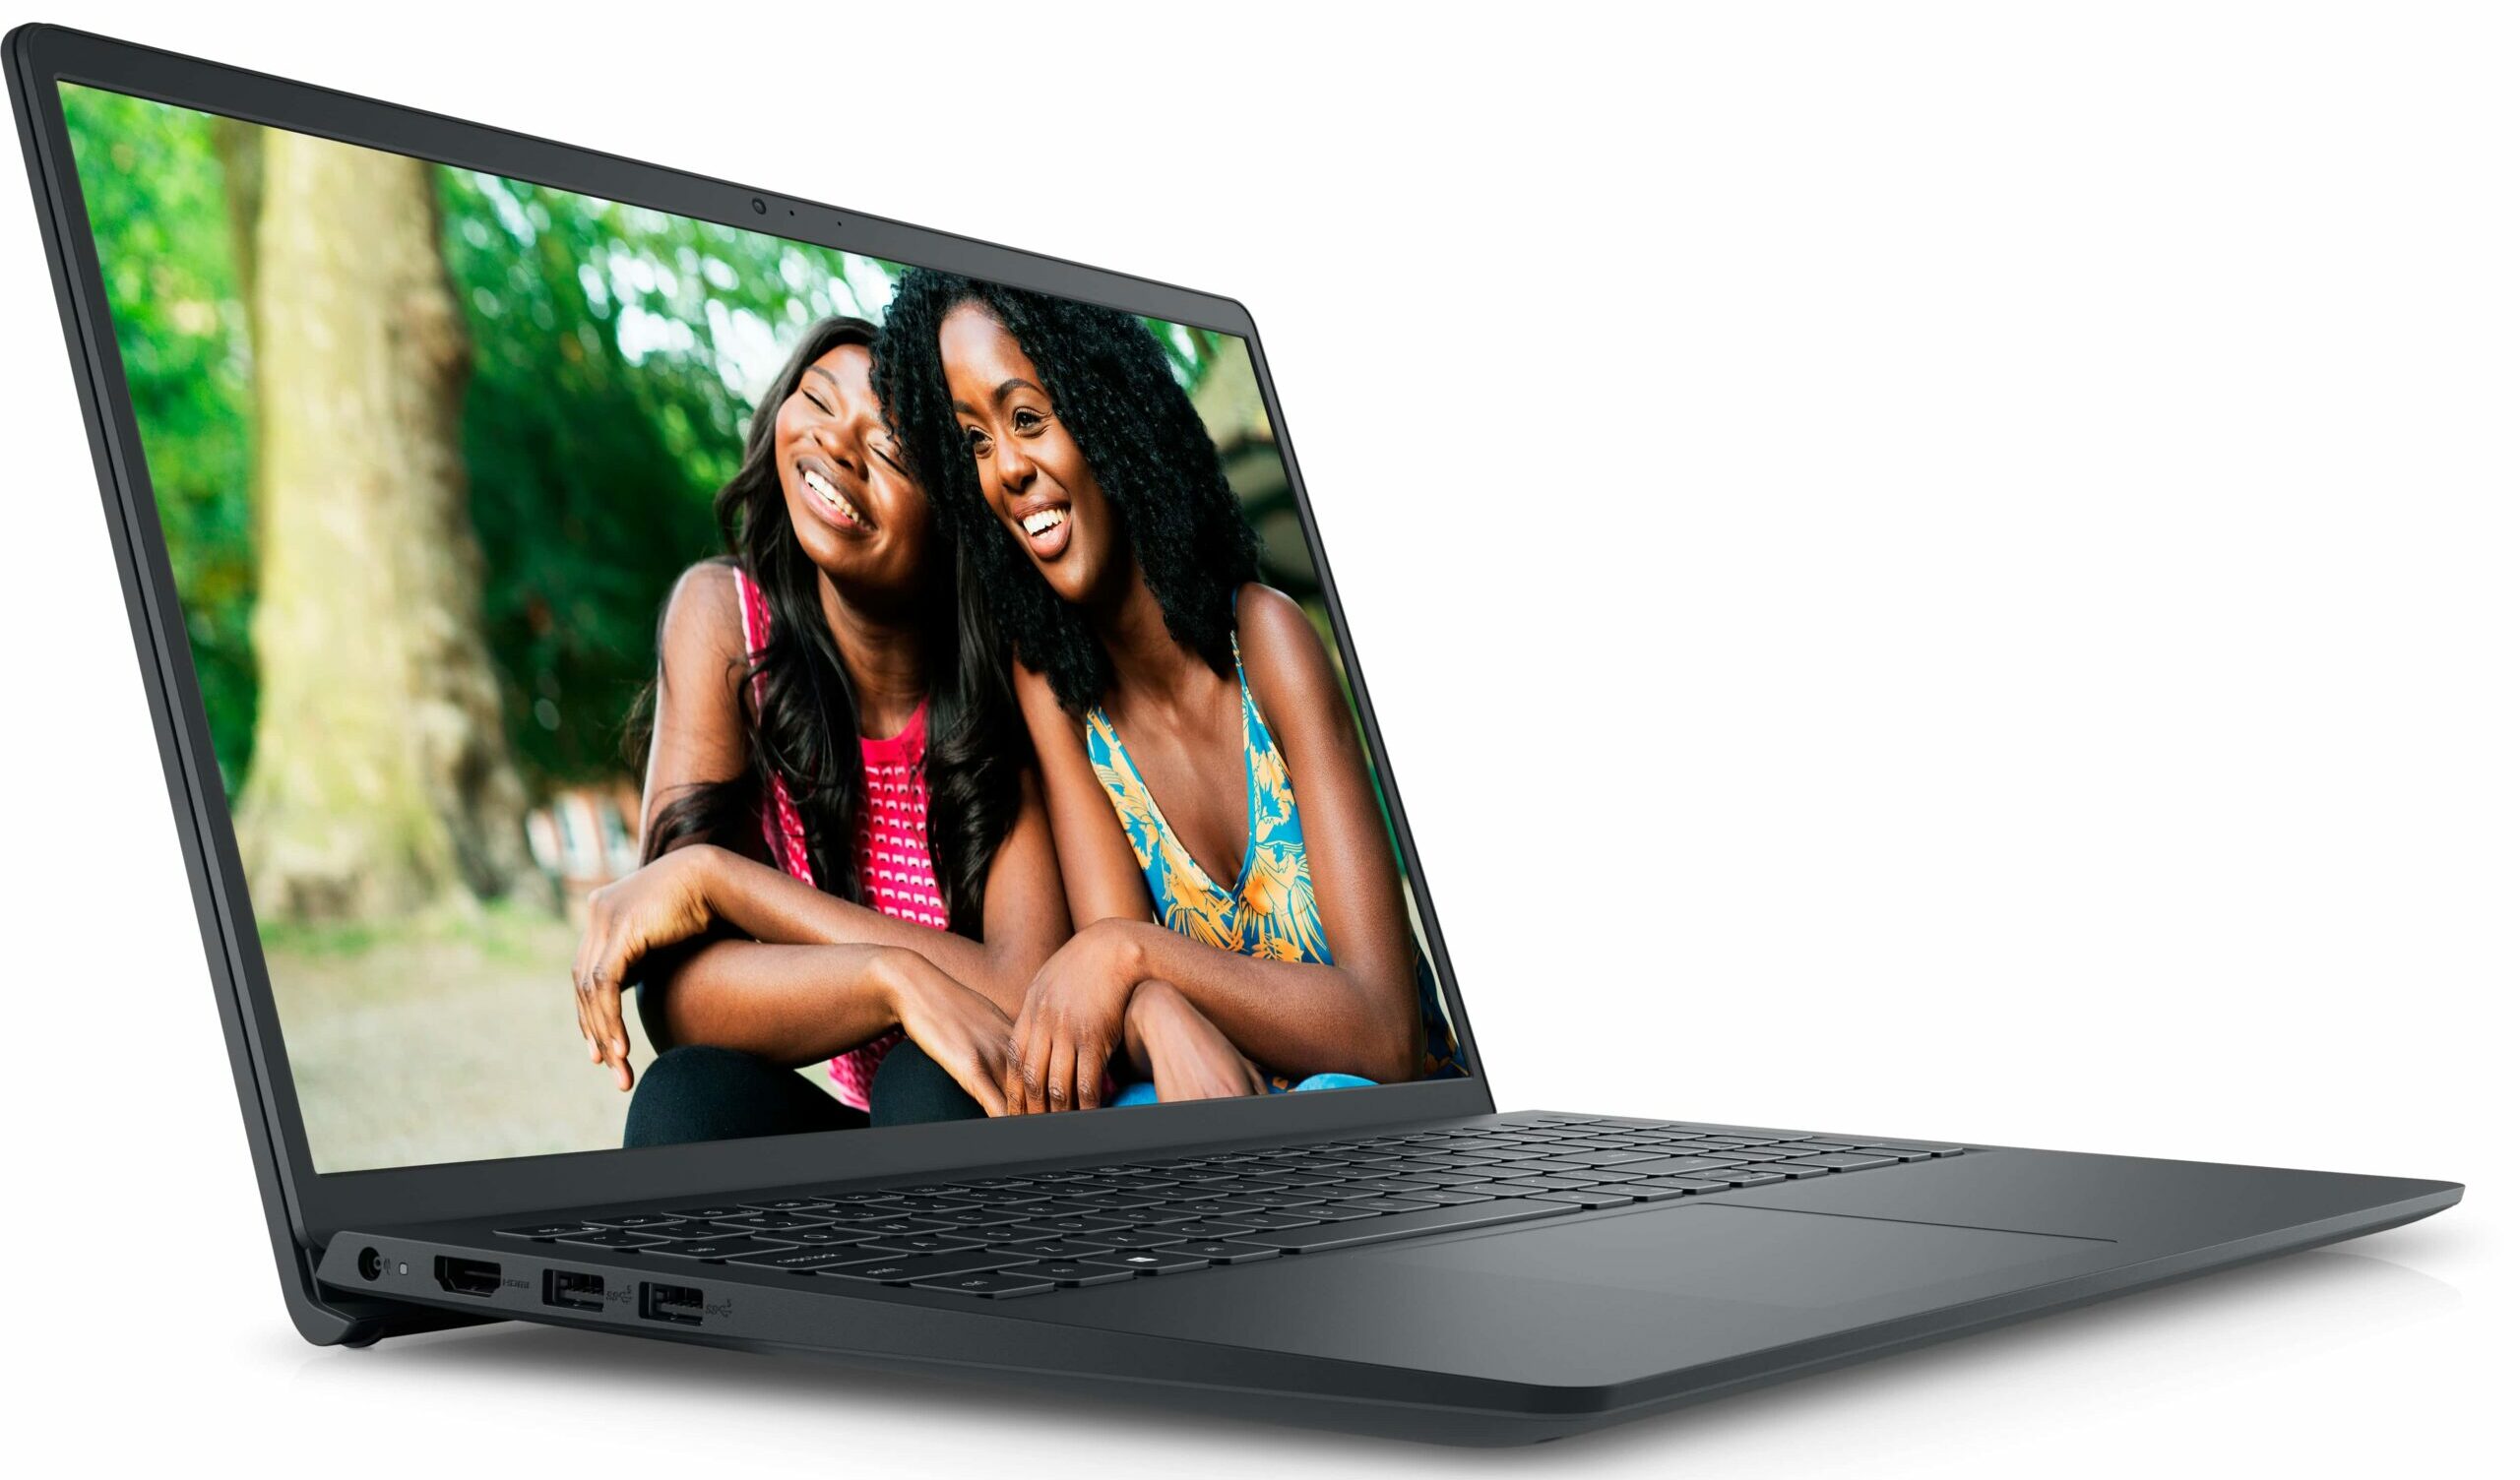 PC/タブレット ノートPC Dell Inspiron 15 3525 - Specs, Tests, and Prices | LaptopMedia.com